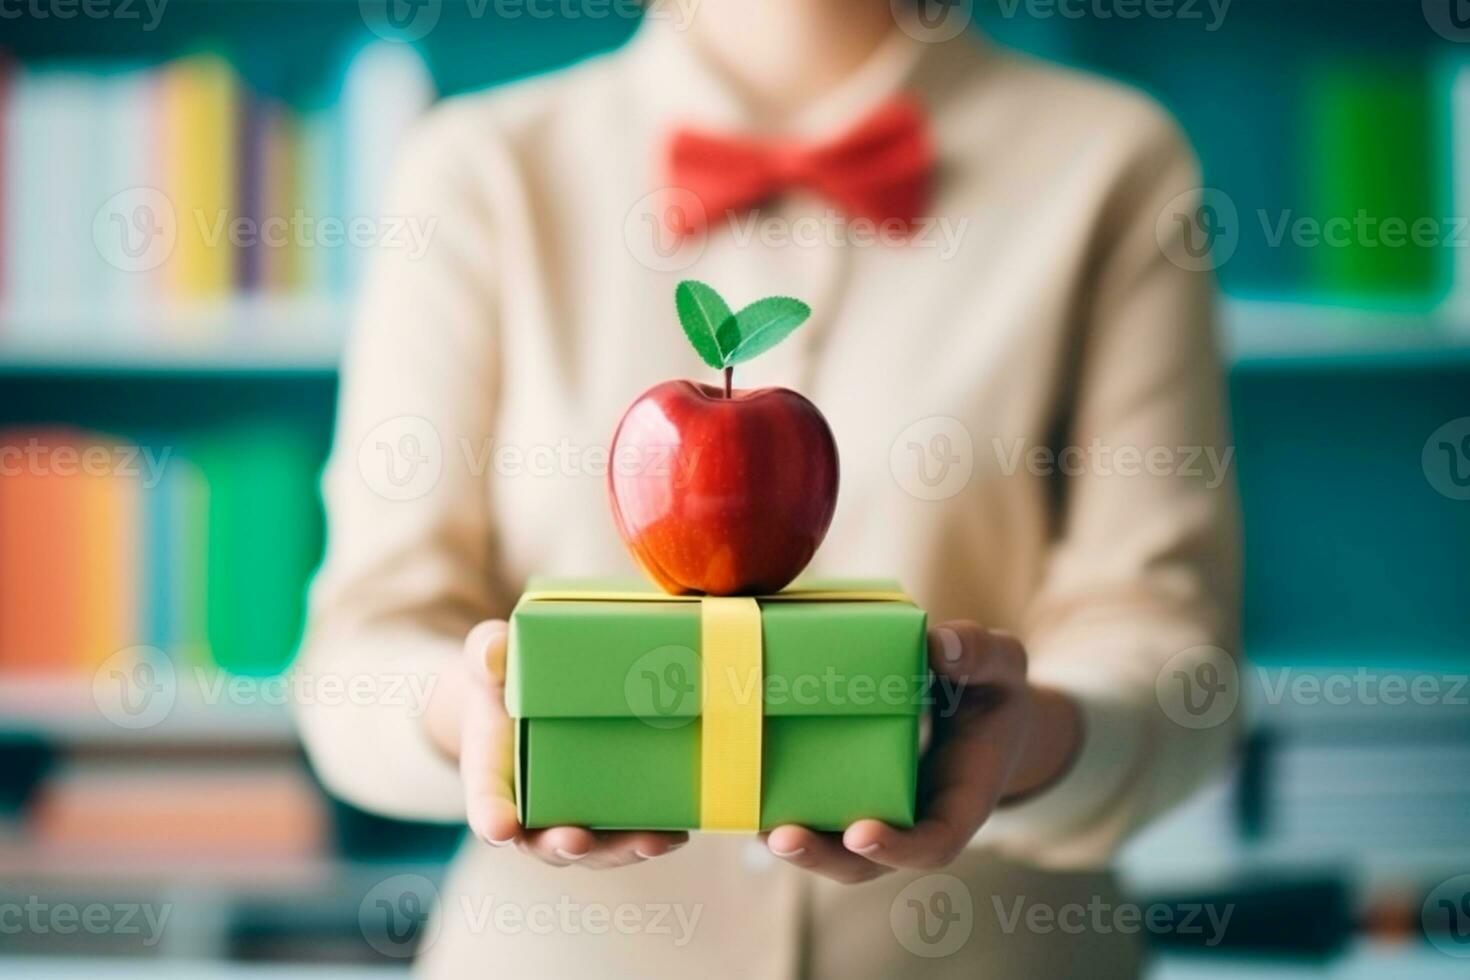 Teachers Day - Teacher holding an apple over a gift received from students on Teachers Day. AI Generate photo